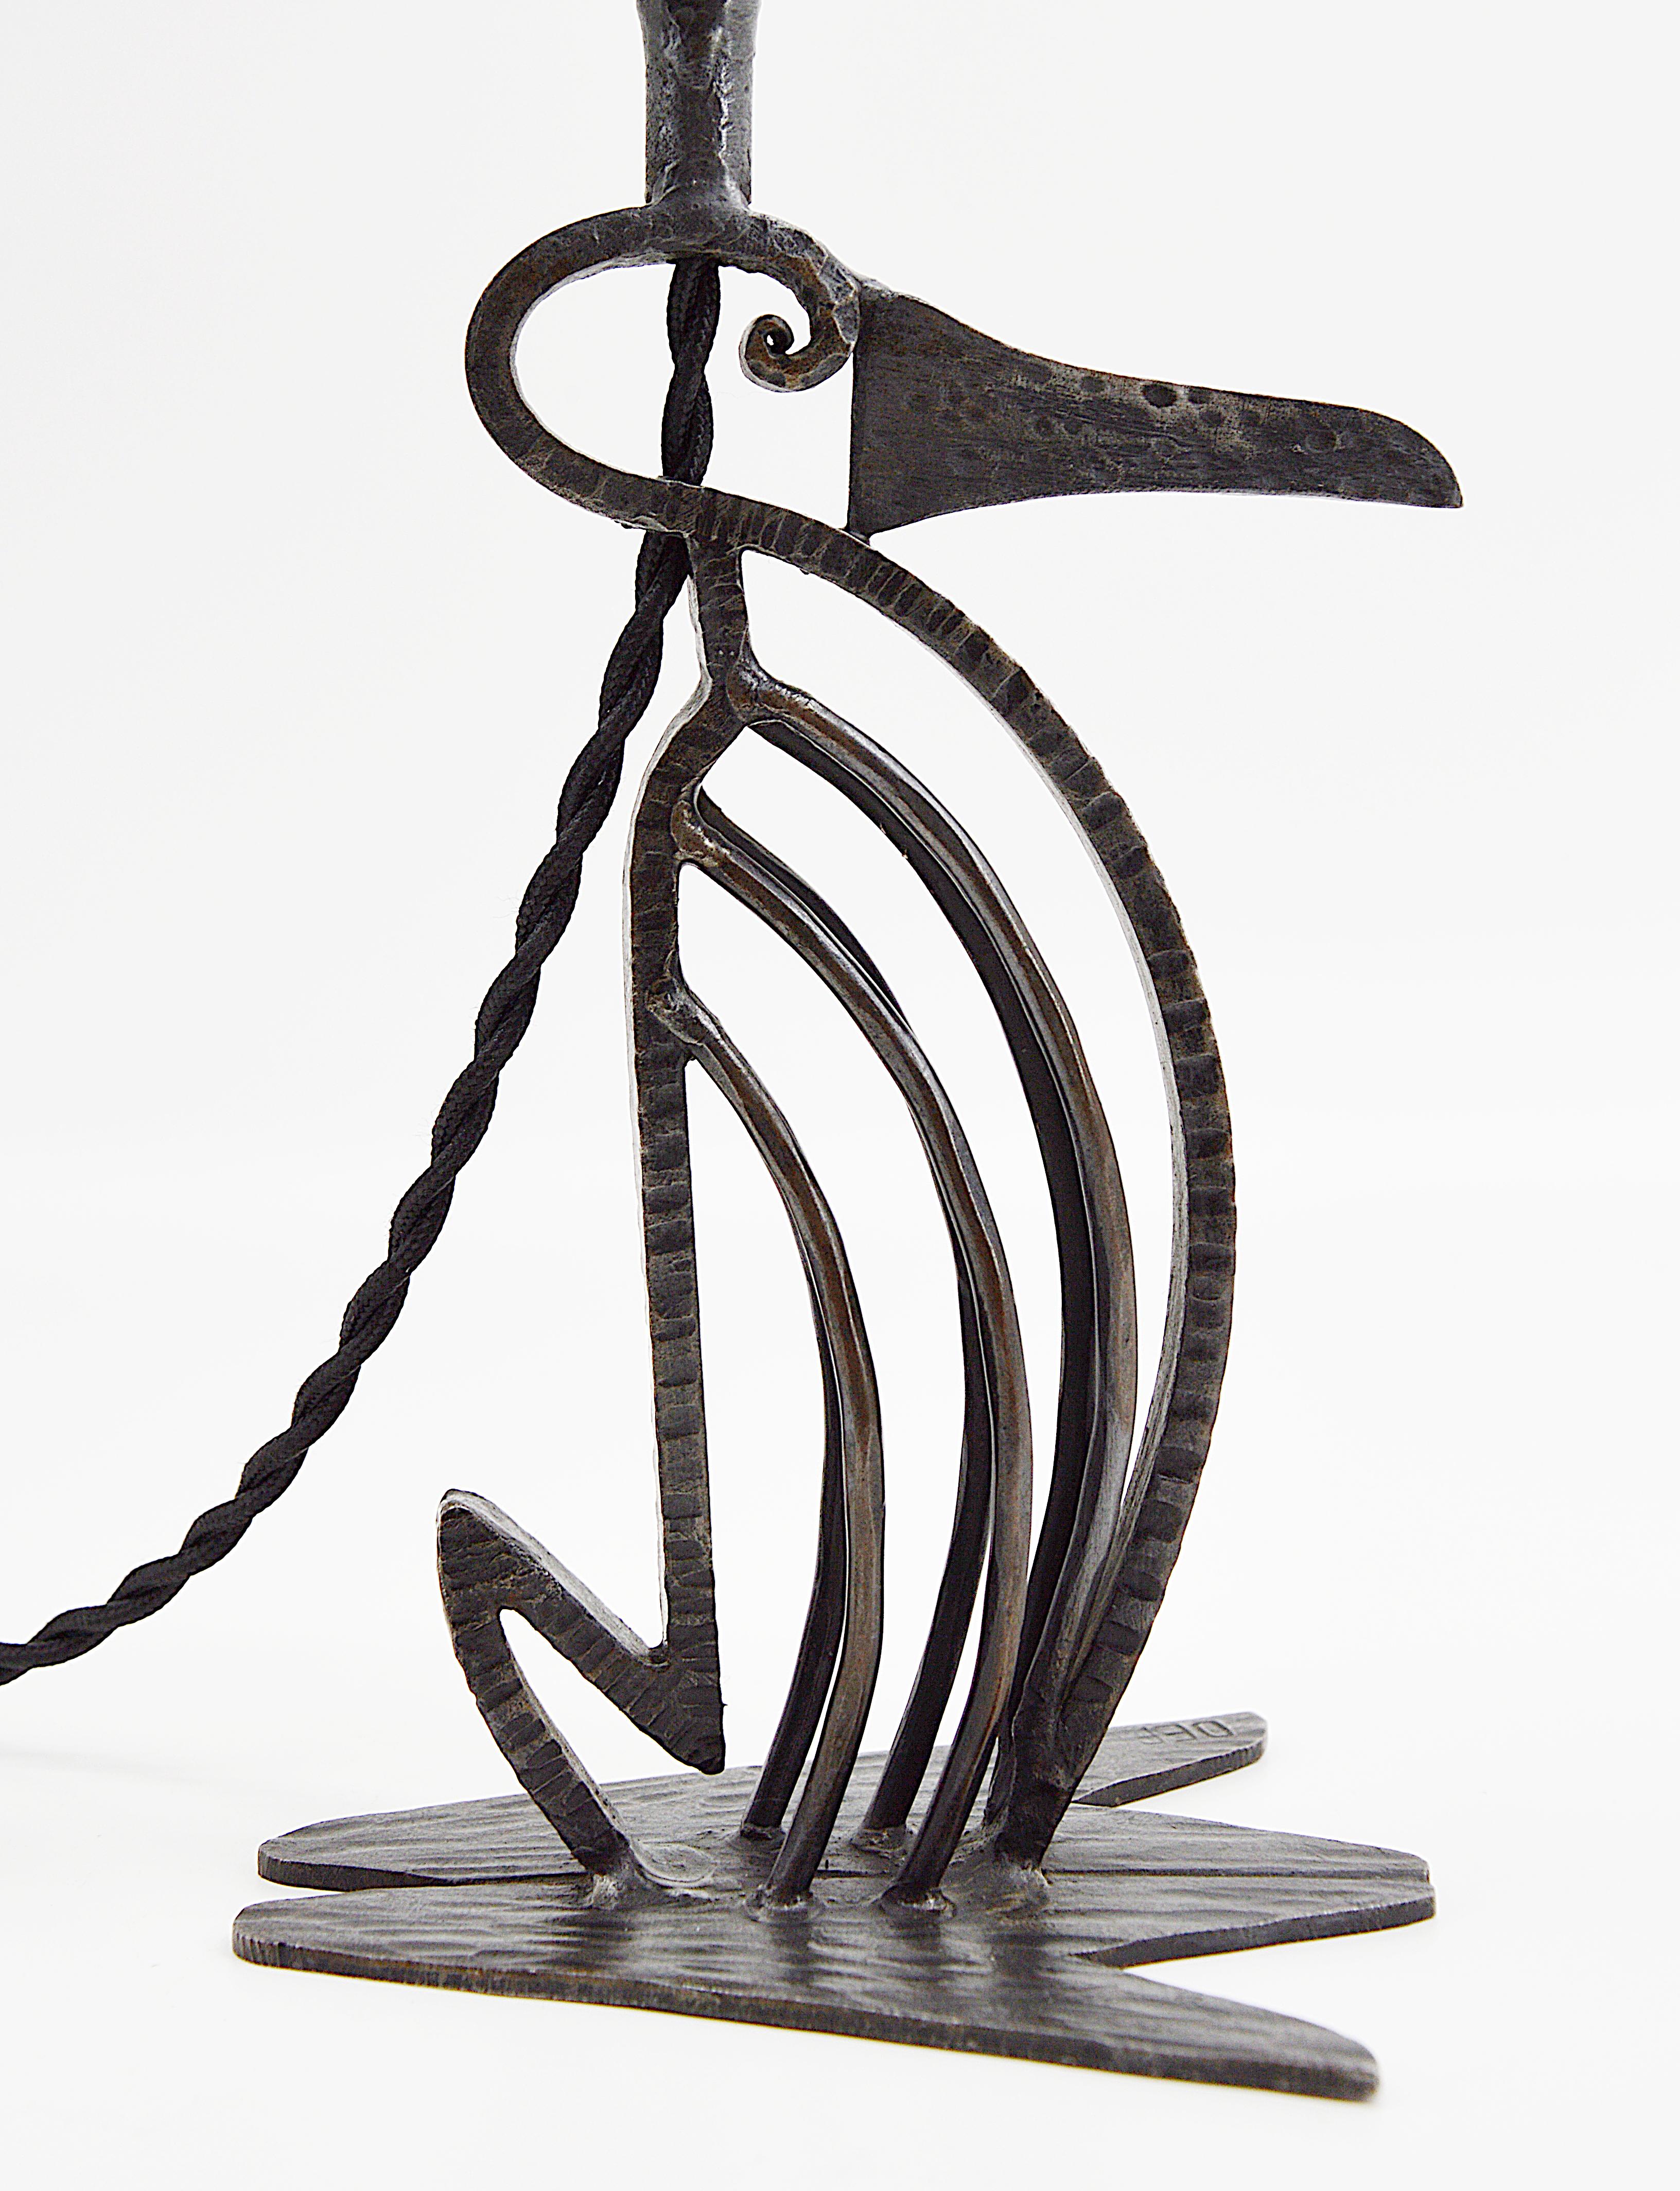 French Art Deco night-light perfume burner by Emile Gauthier, 180 rue Etienne-Marcel, Bagnolet, Paris, France and Fratelli Toso, Venice, Italy, 1920s. Charming wrought iron penguin by Emile Gauthier supporting a perfume burner lampshade by Fratelli